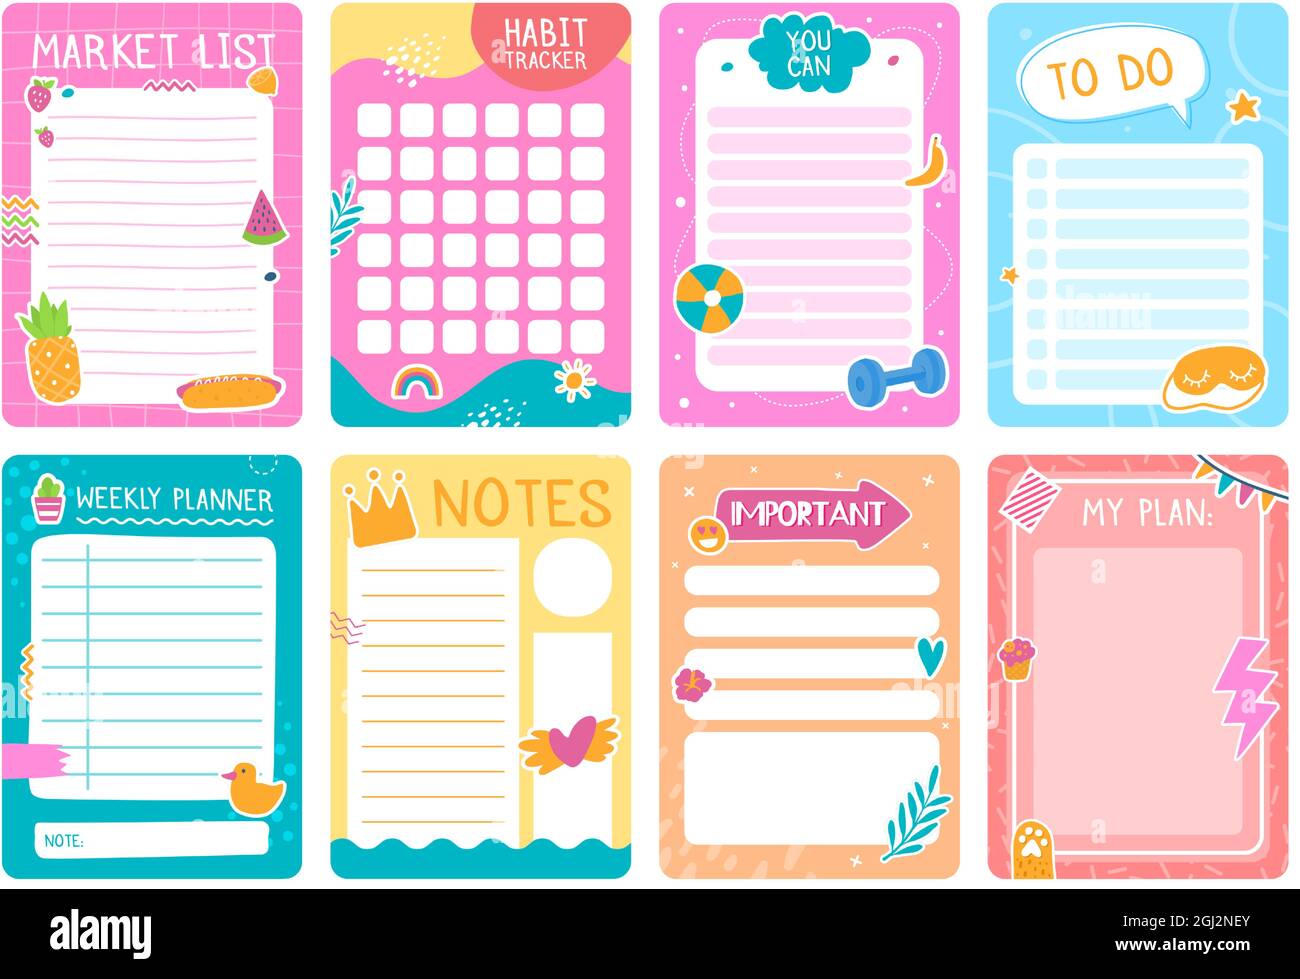 Cute planner pages with stickers, notebook or diary template. Weekly planner, to do list, habit tracker kids journal page design vector set. Schedule, you can and plans checklist for print Stock Vector